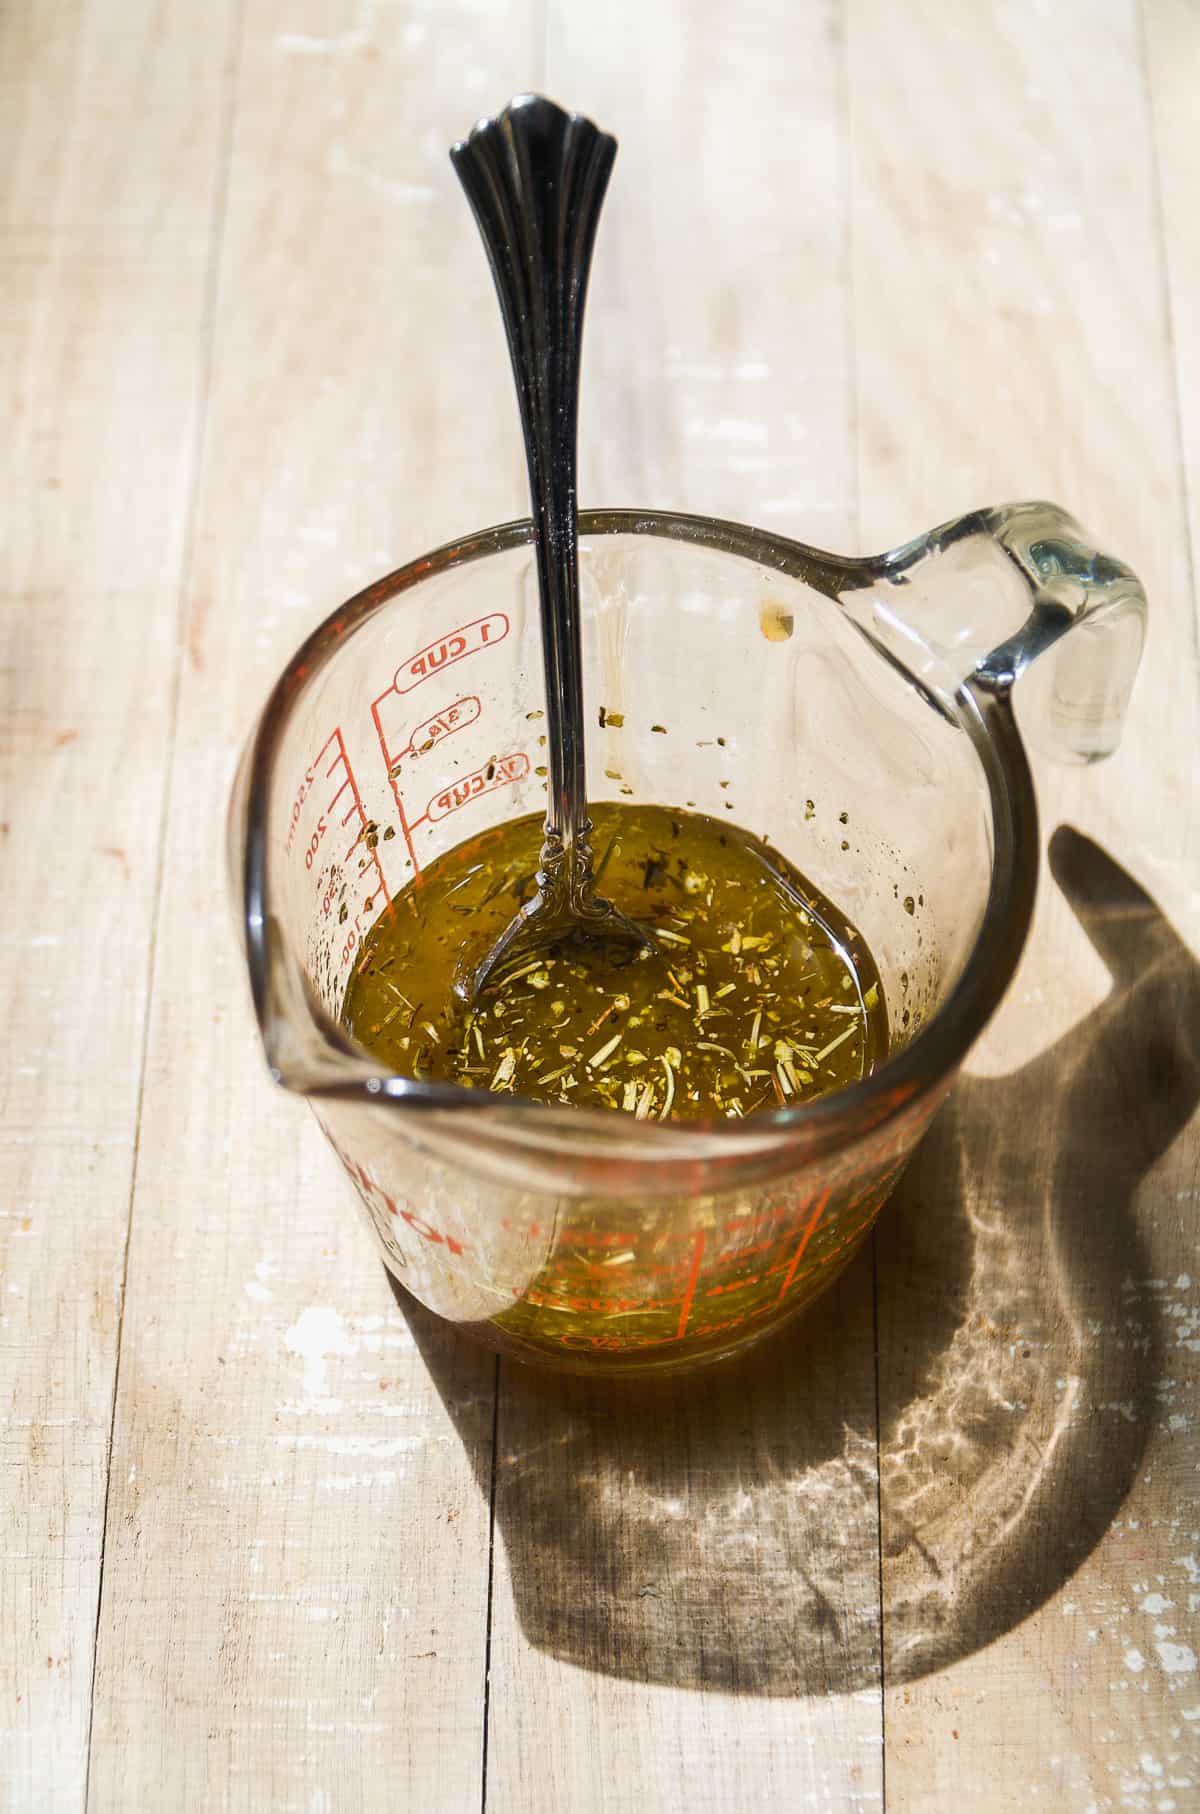 Glass measuring cup with italian dressing and a spoon inside.